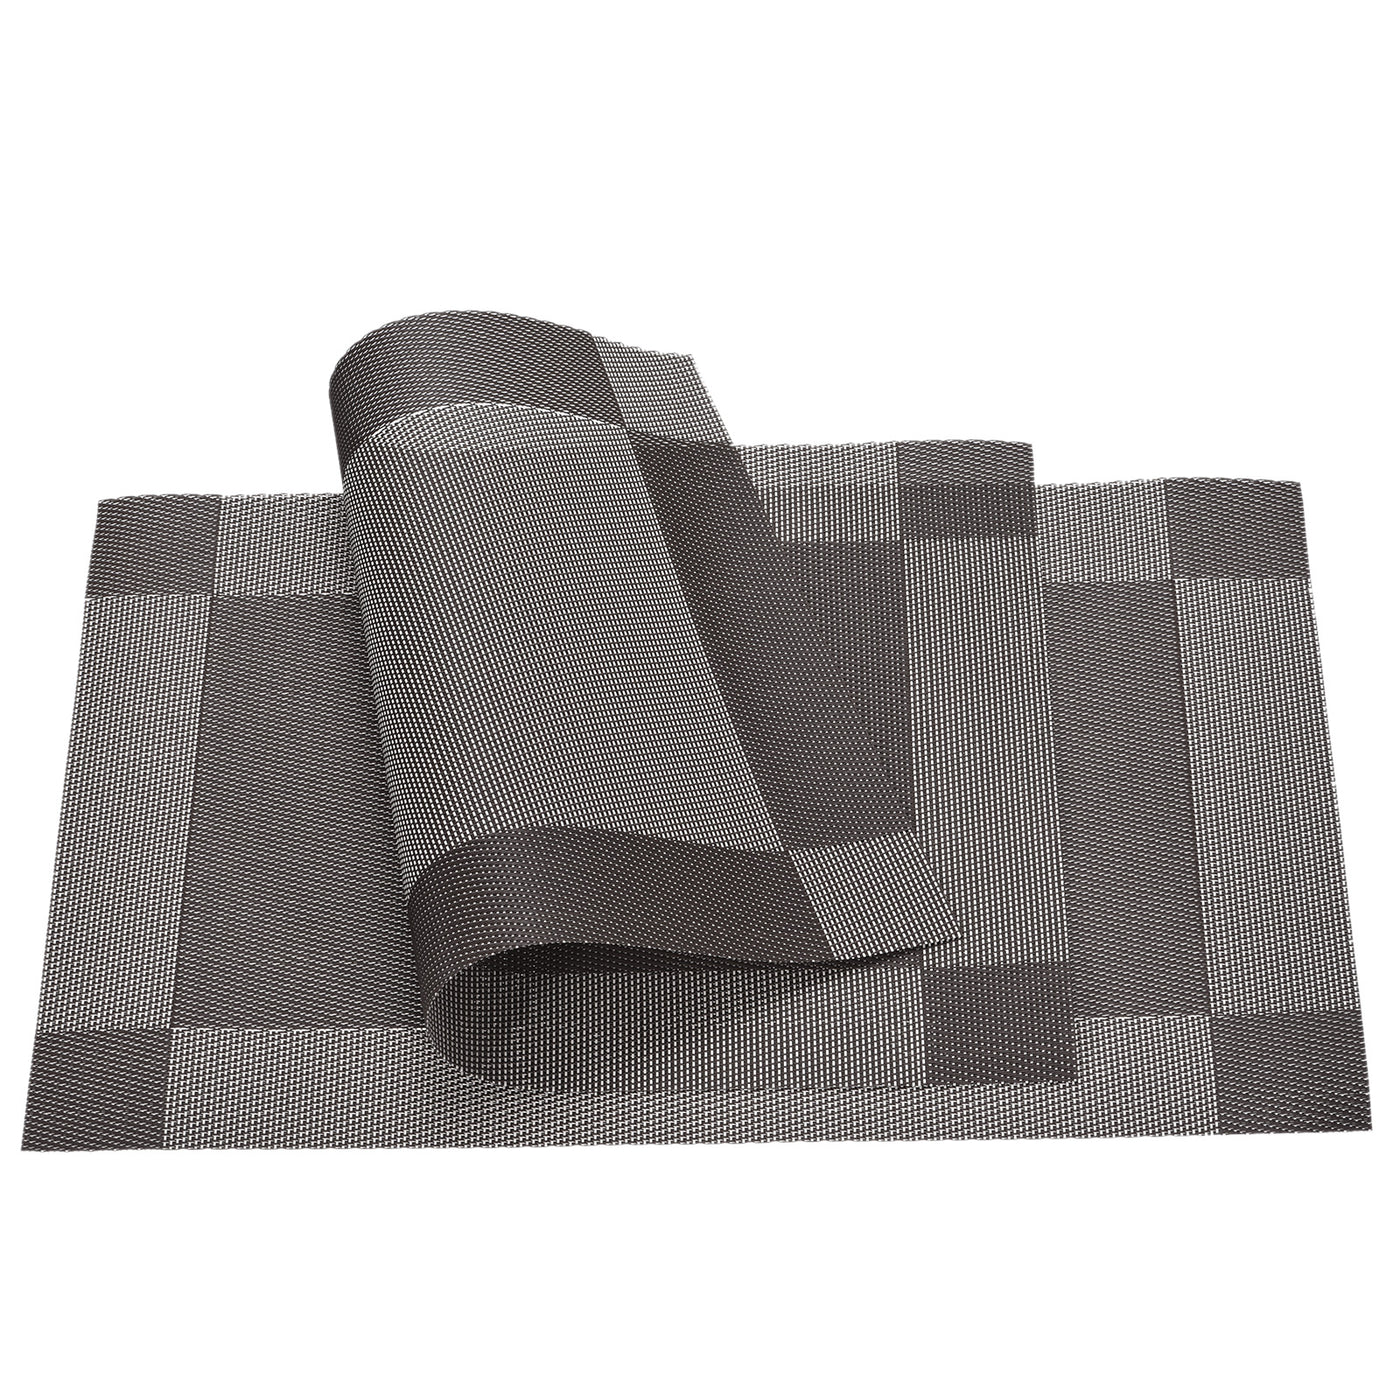 uxcell Uxcell Place Mats 450x300mm 2pcs PVC Table Washable Woven Placemat, Dark Coffee